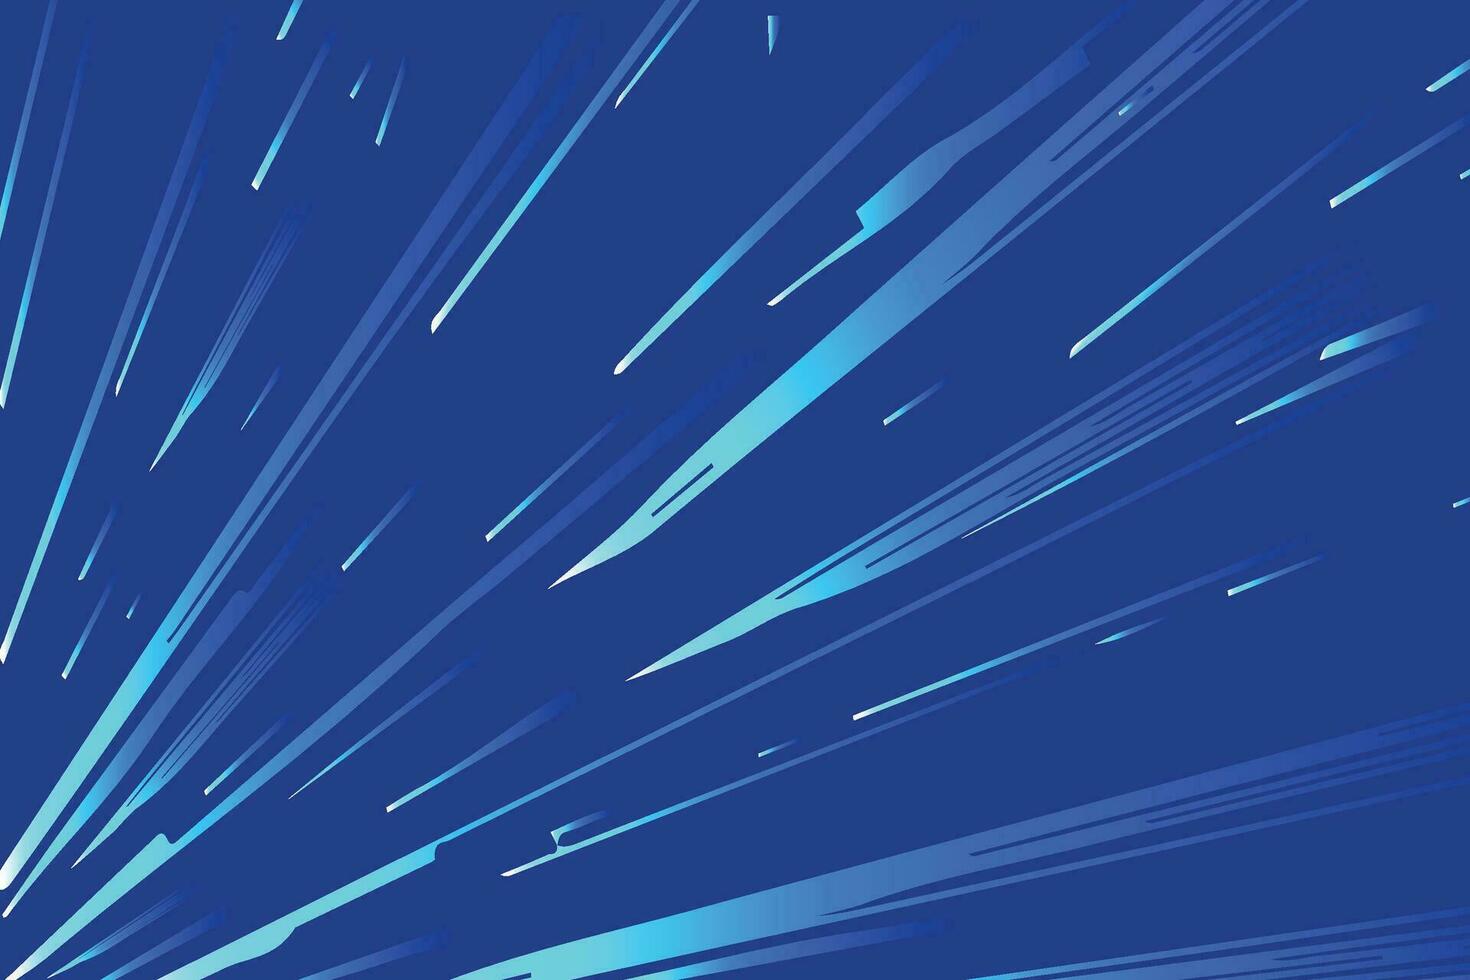 speed  light lines isolated on background stripe and radial effect style for manga speed frame, superhero action, explosion background vector